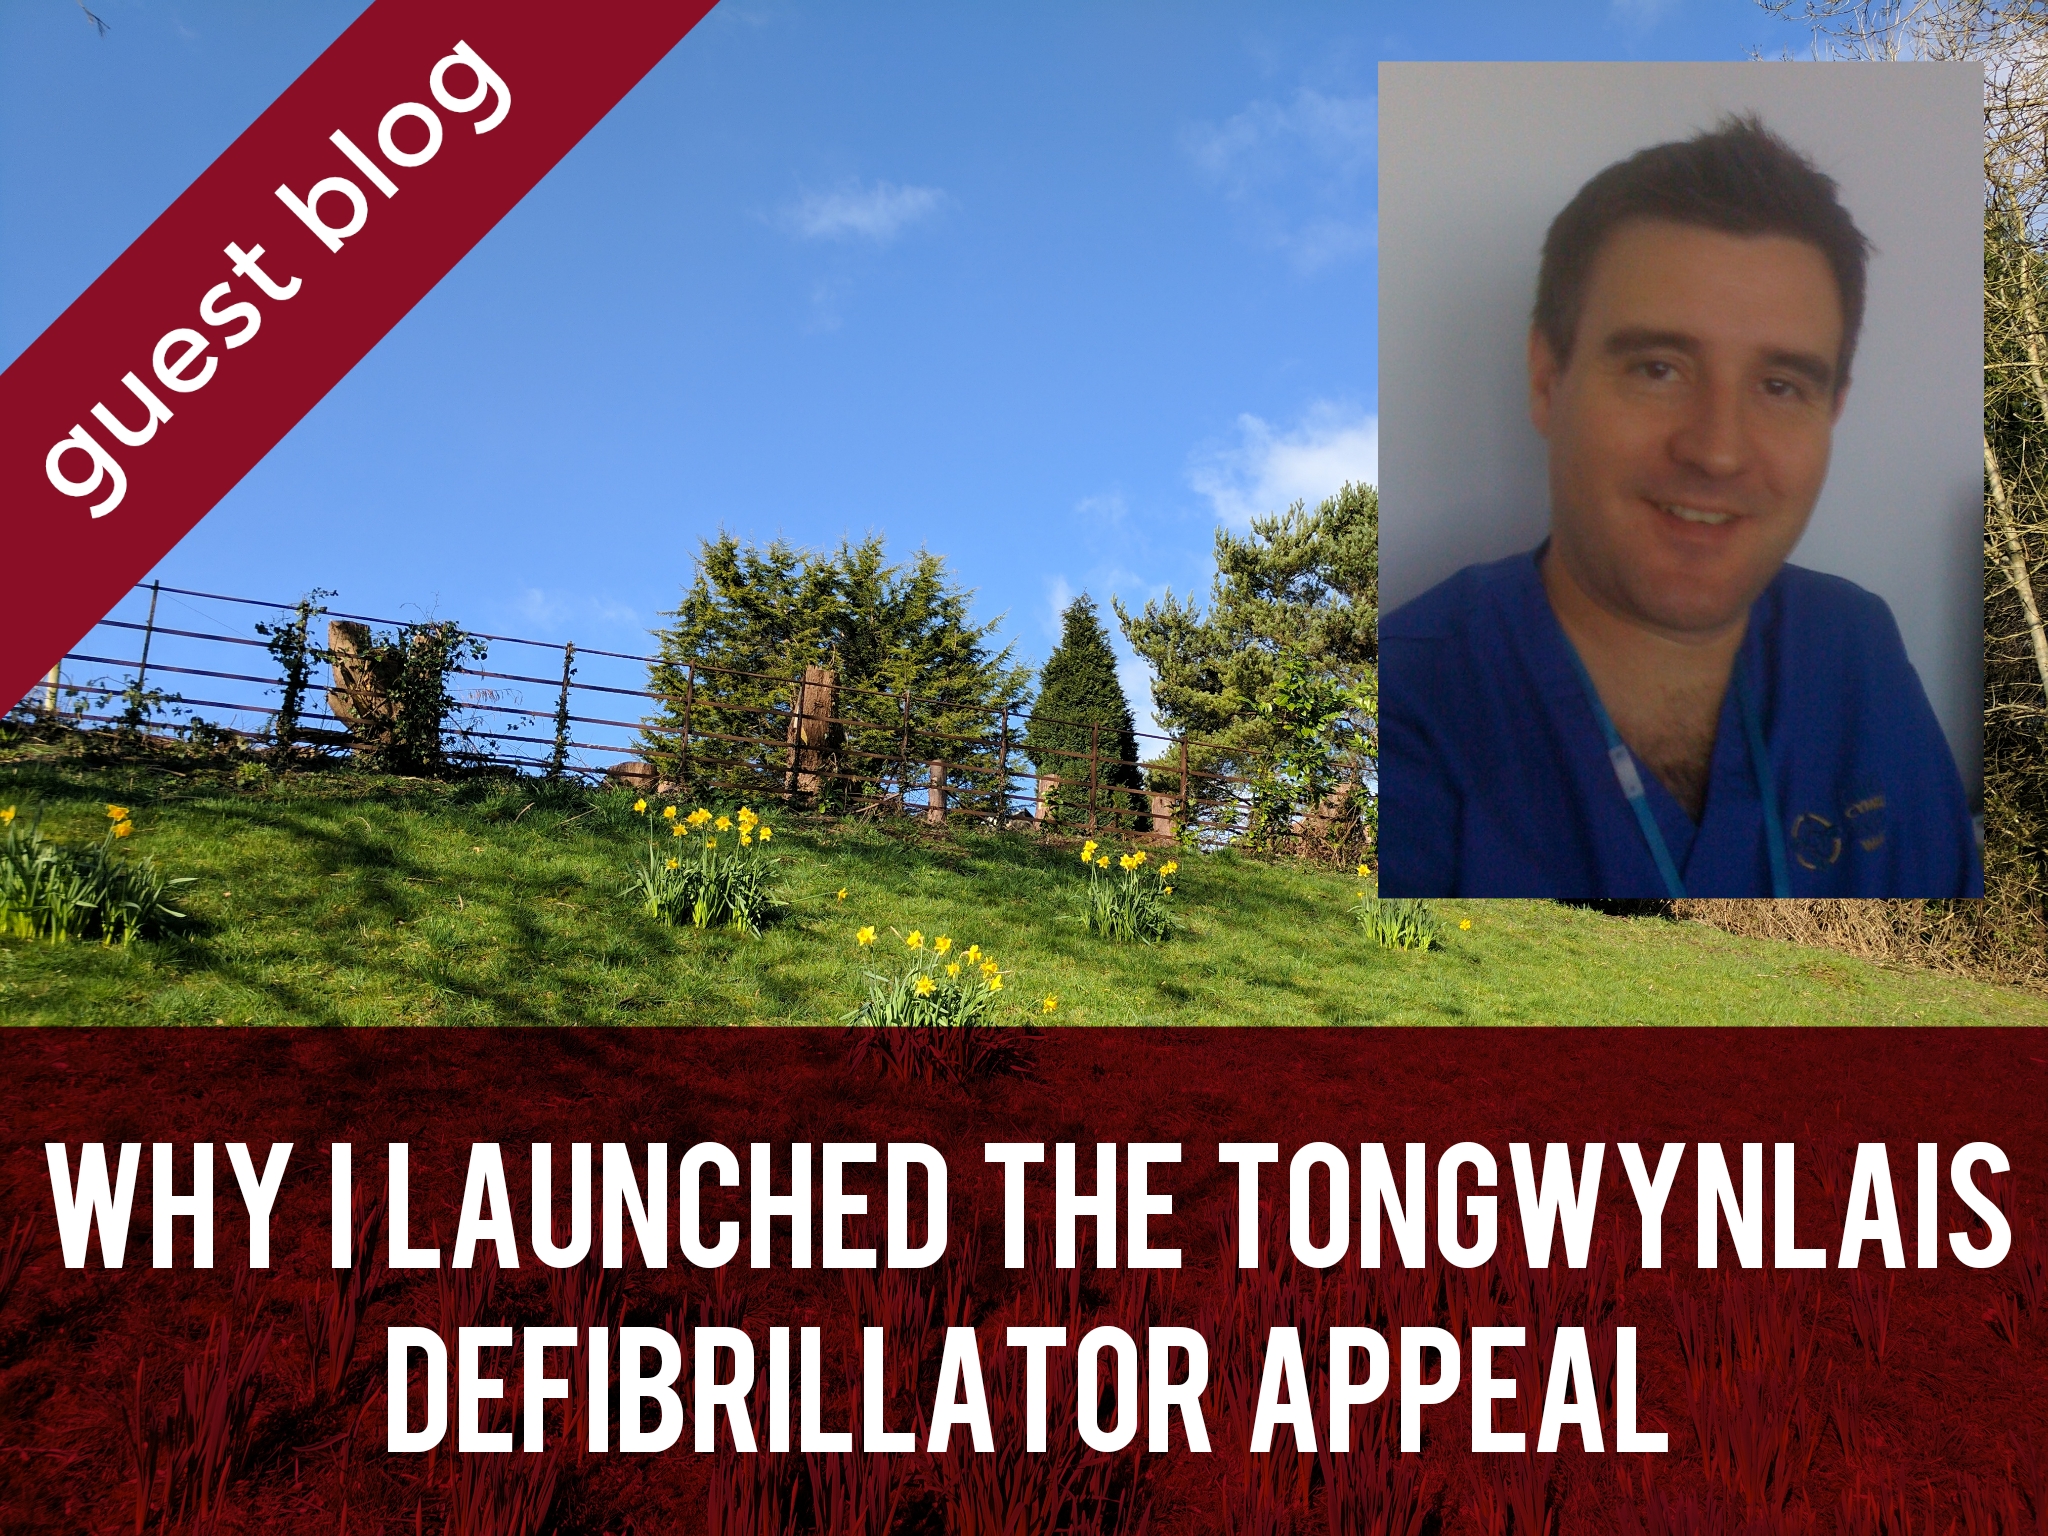 Why I launched the Tongwynlais defibrillator appeal header